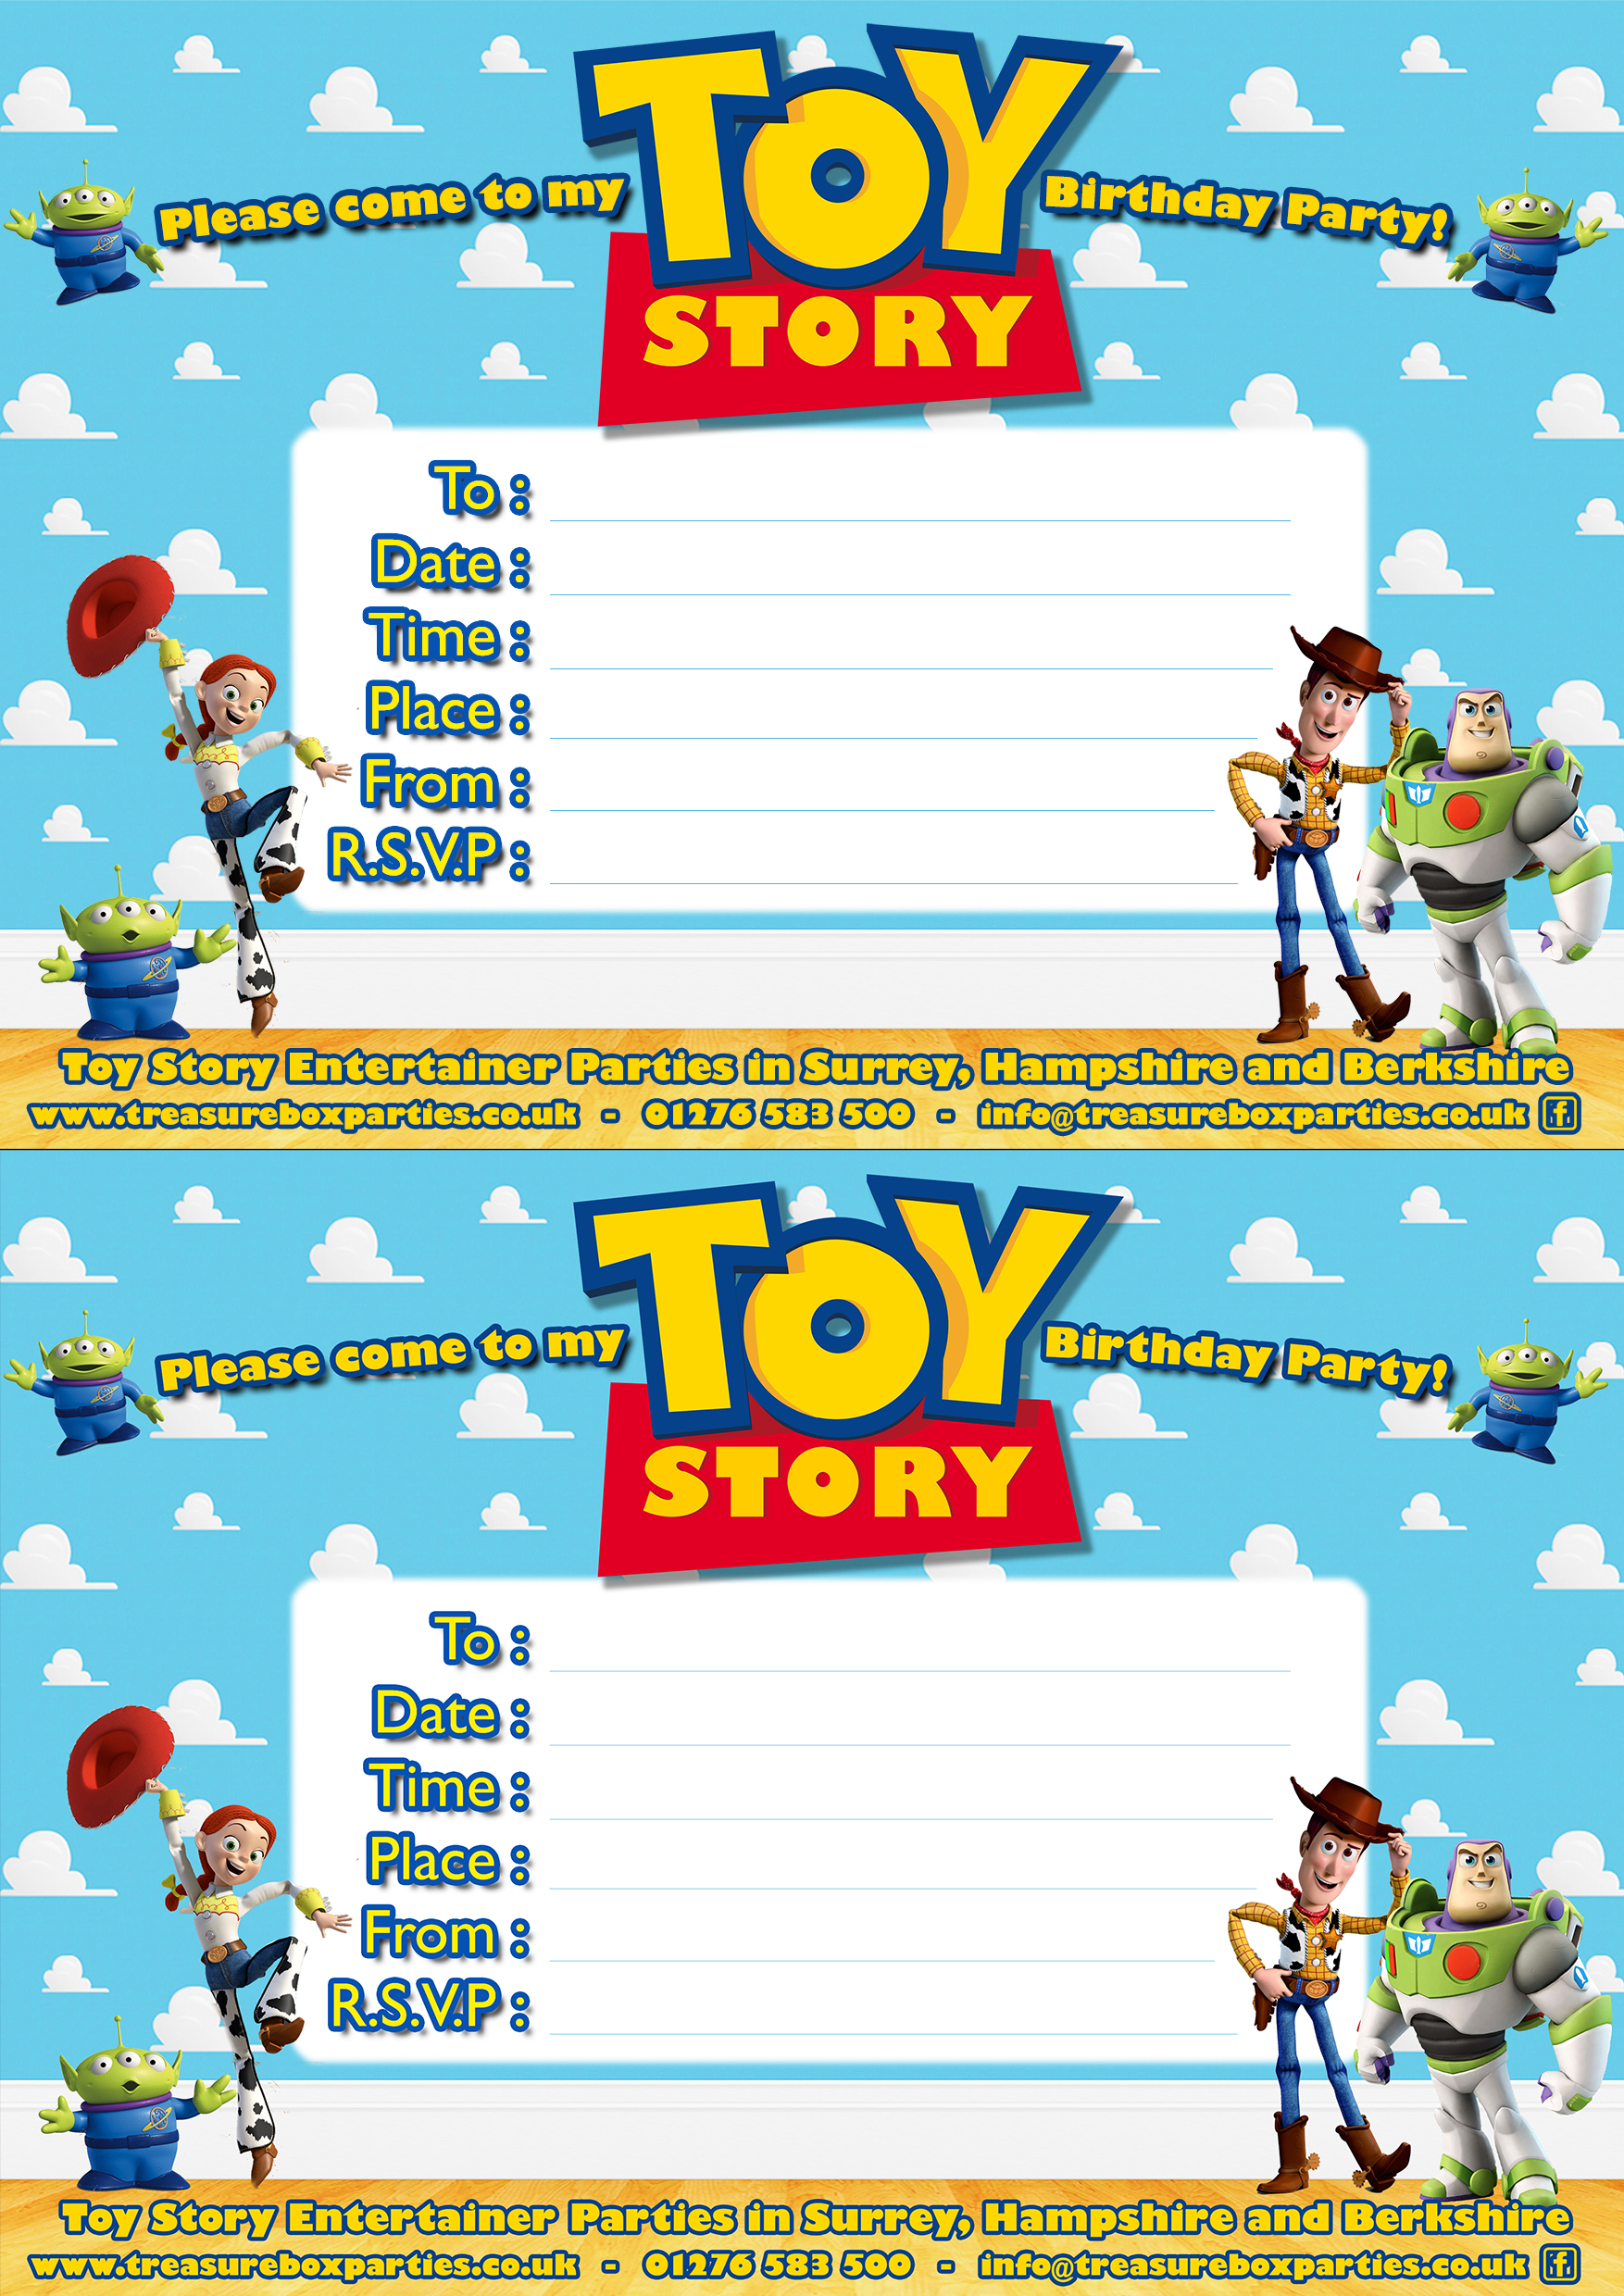 Free Toy Story Birthday Party Invitation A4 Sheet Childrens Entertainer Parties Surrey Berkshire Hampshire Treasure Box Parties Supplies Kids Party Games Ideas